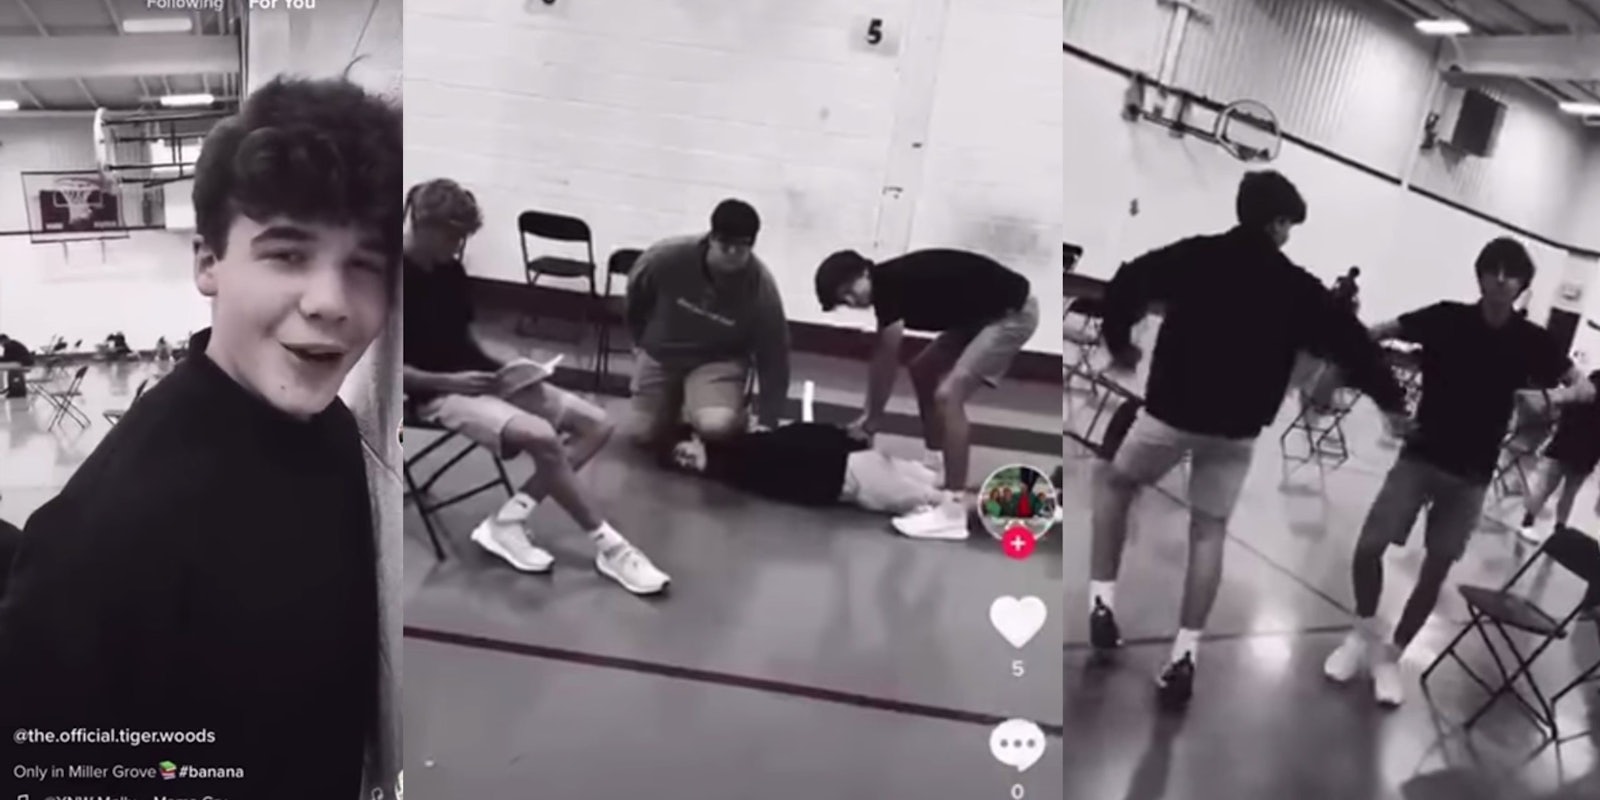 The video shows the boys mocking Floyd's last few moments